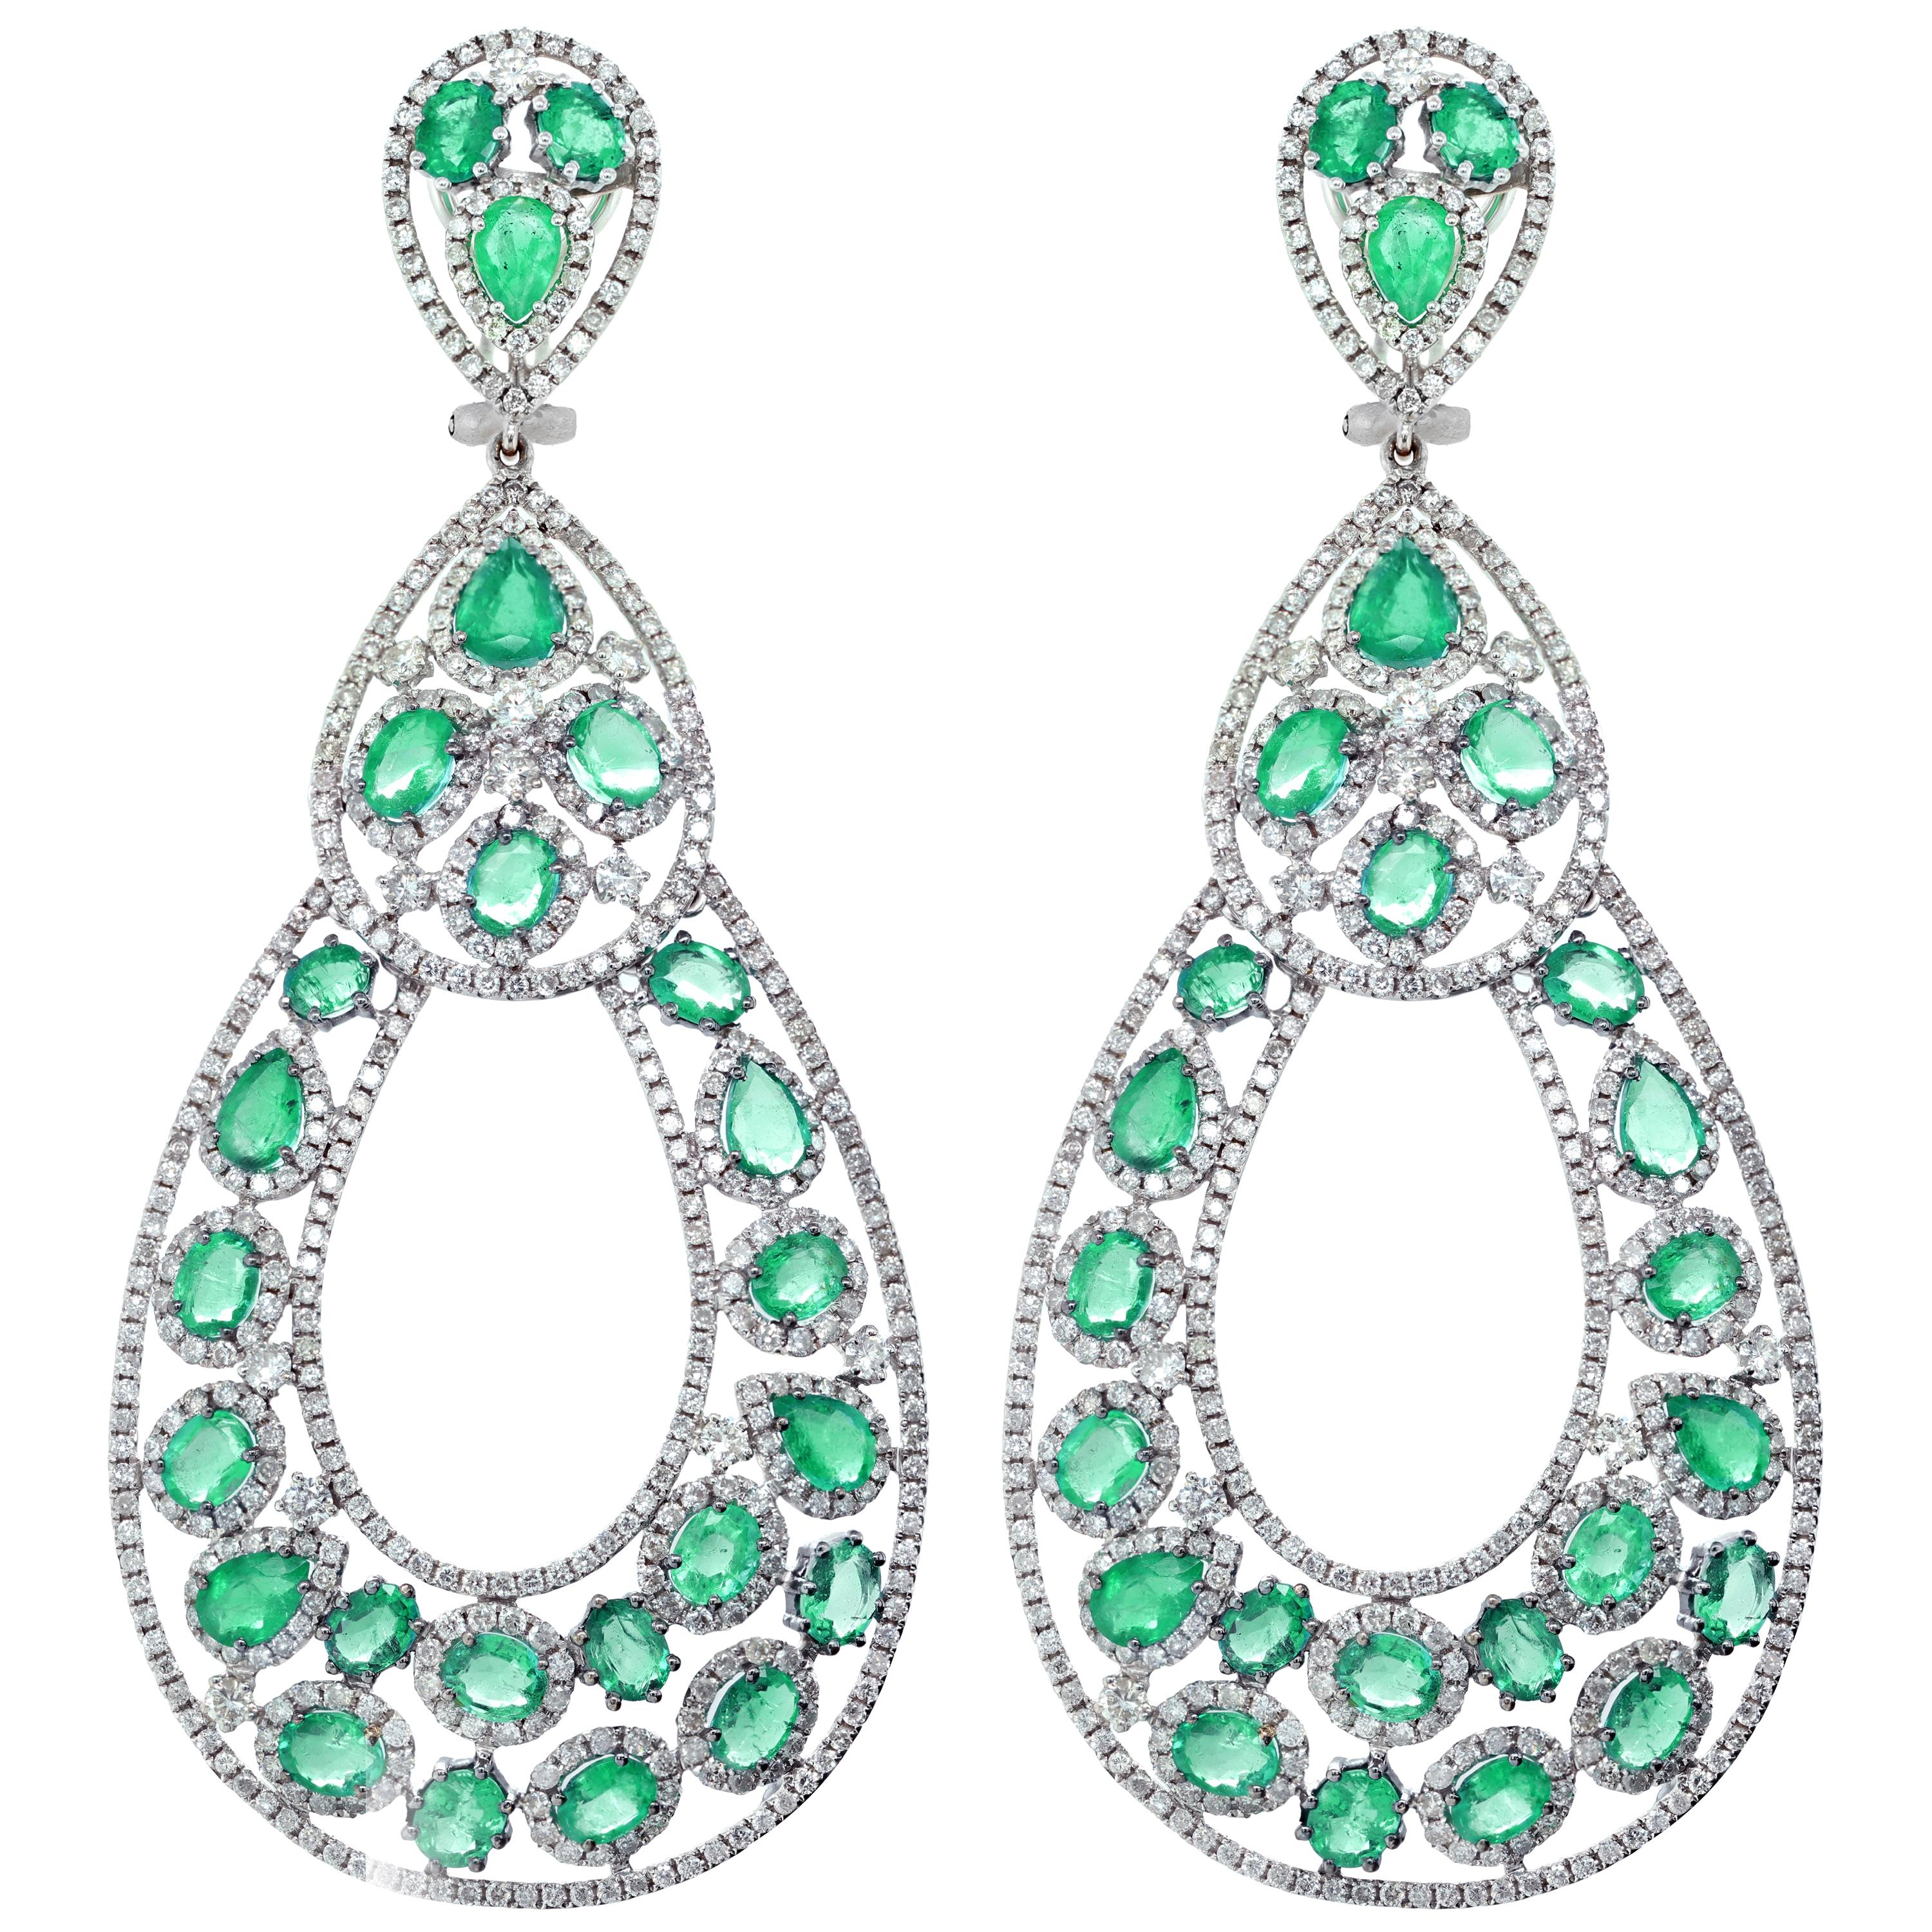 Diana M. Stunning Emerald and Diamond Earrings by Diana M. For Sale